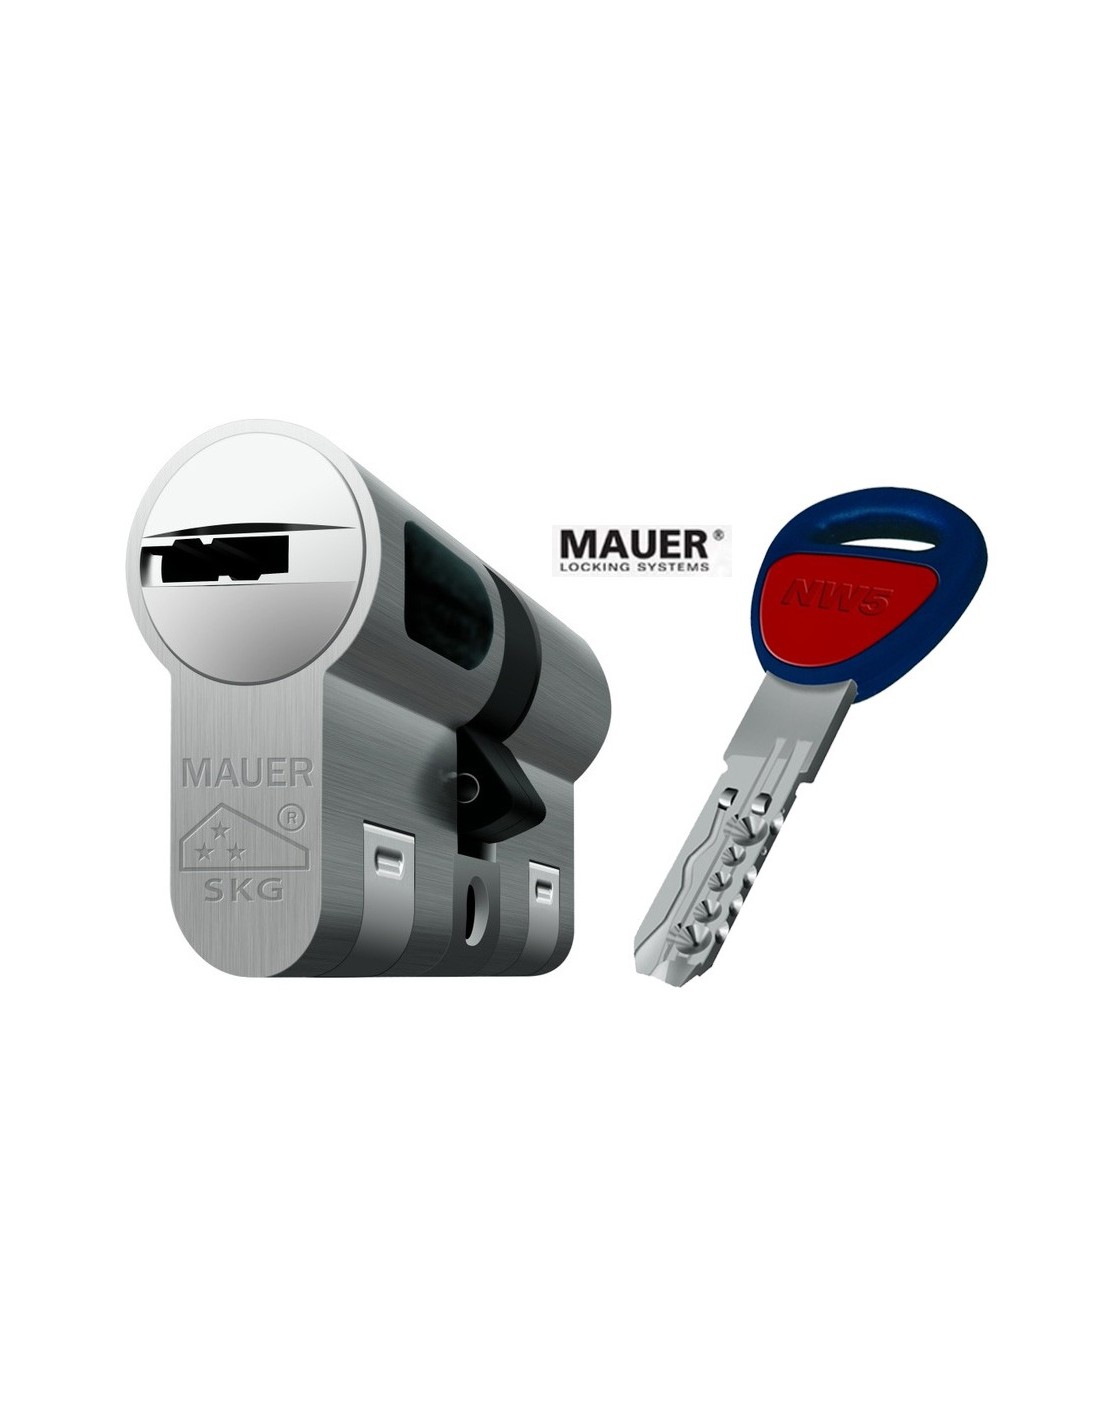 Cilindro MAUER Pomo New Wave NW5 doble embrague